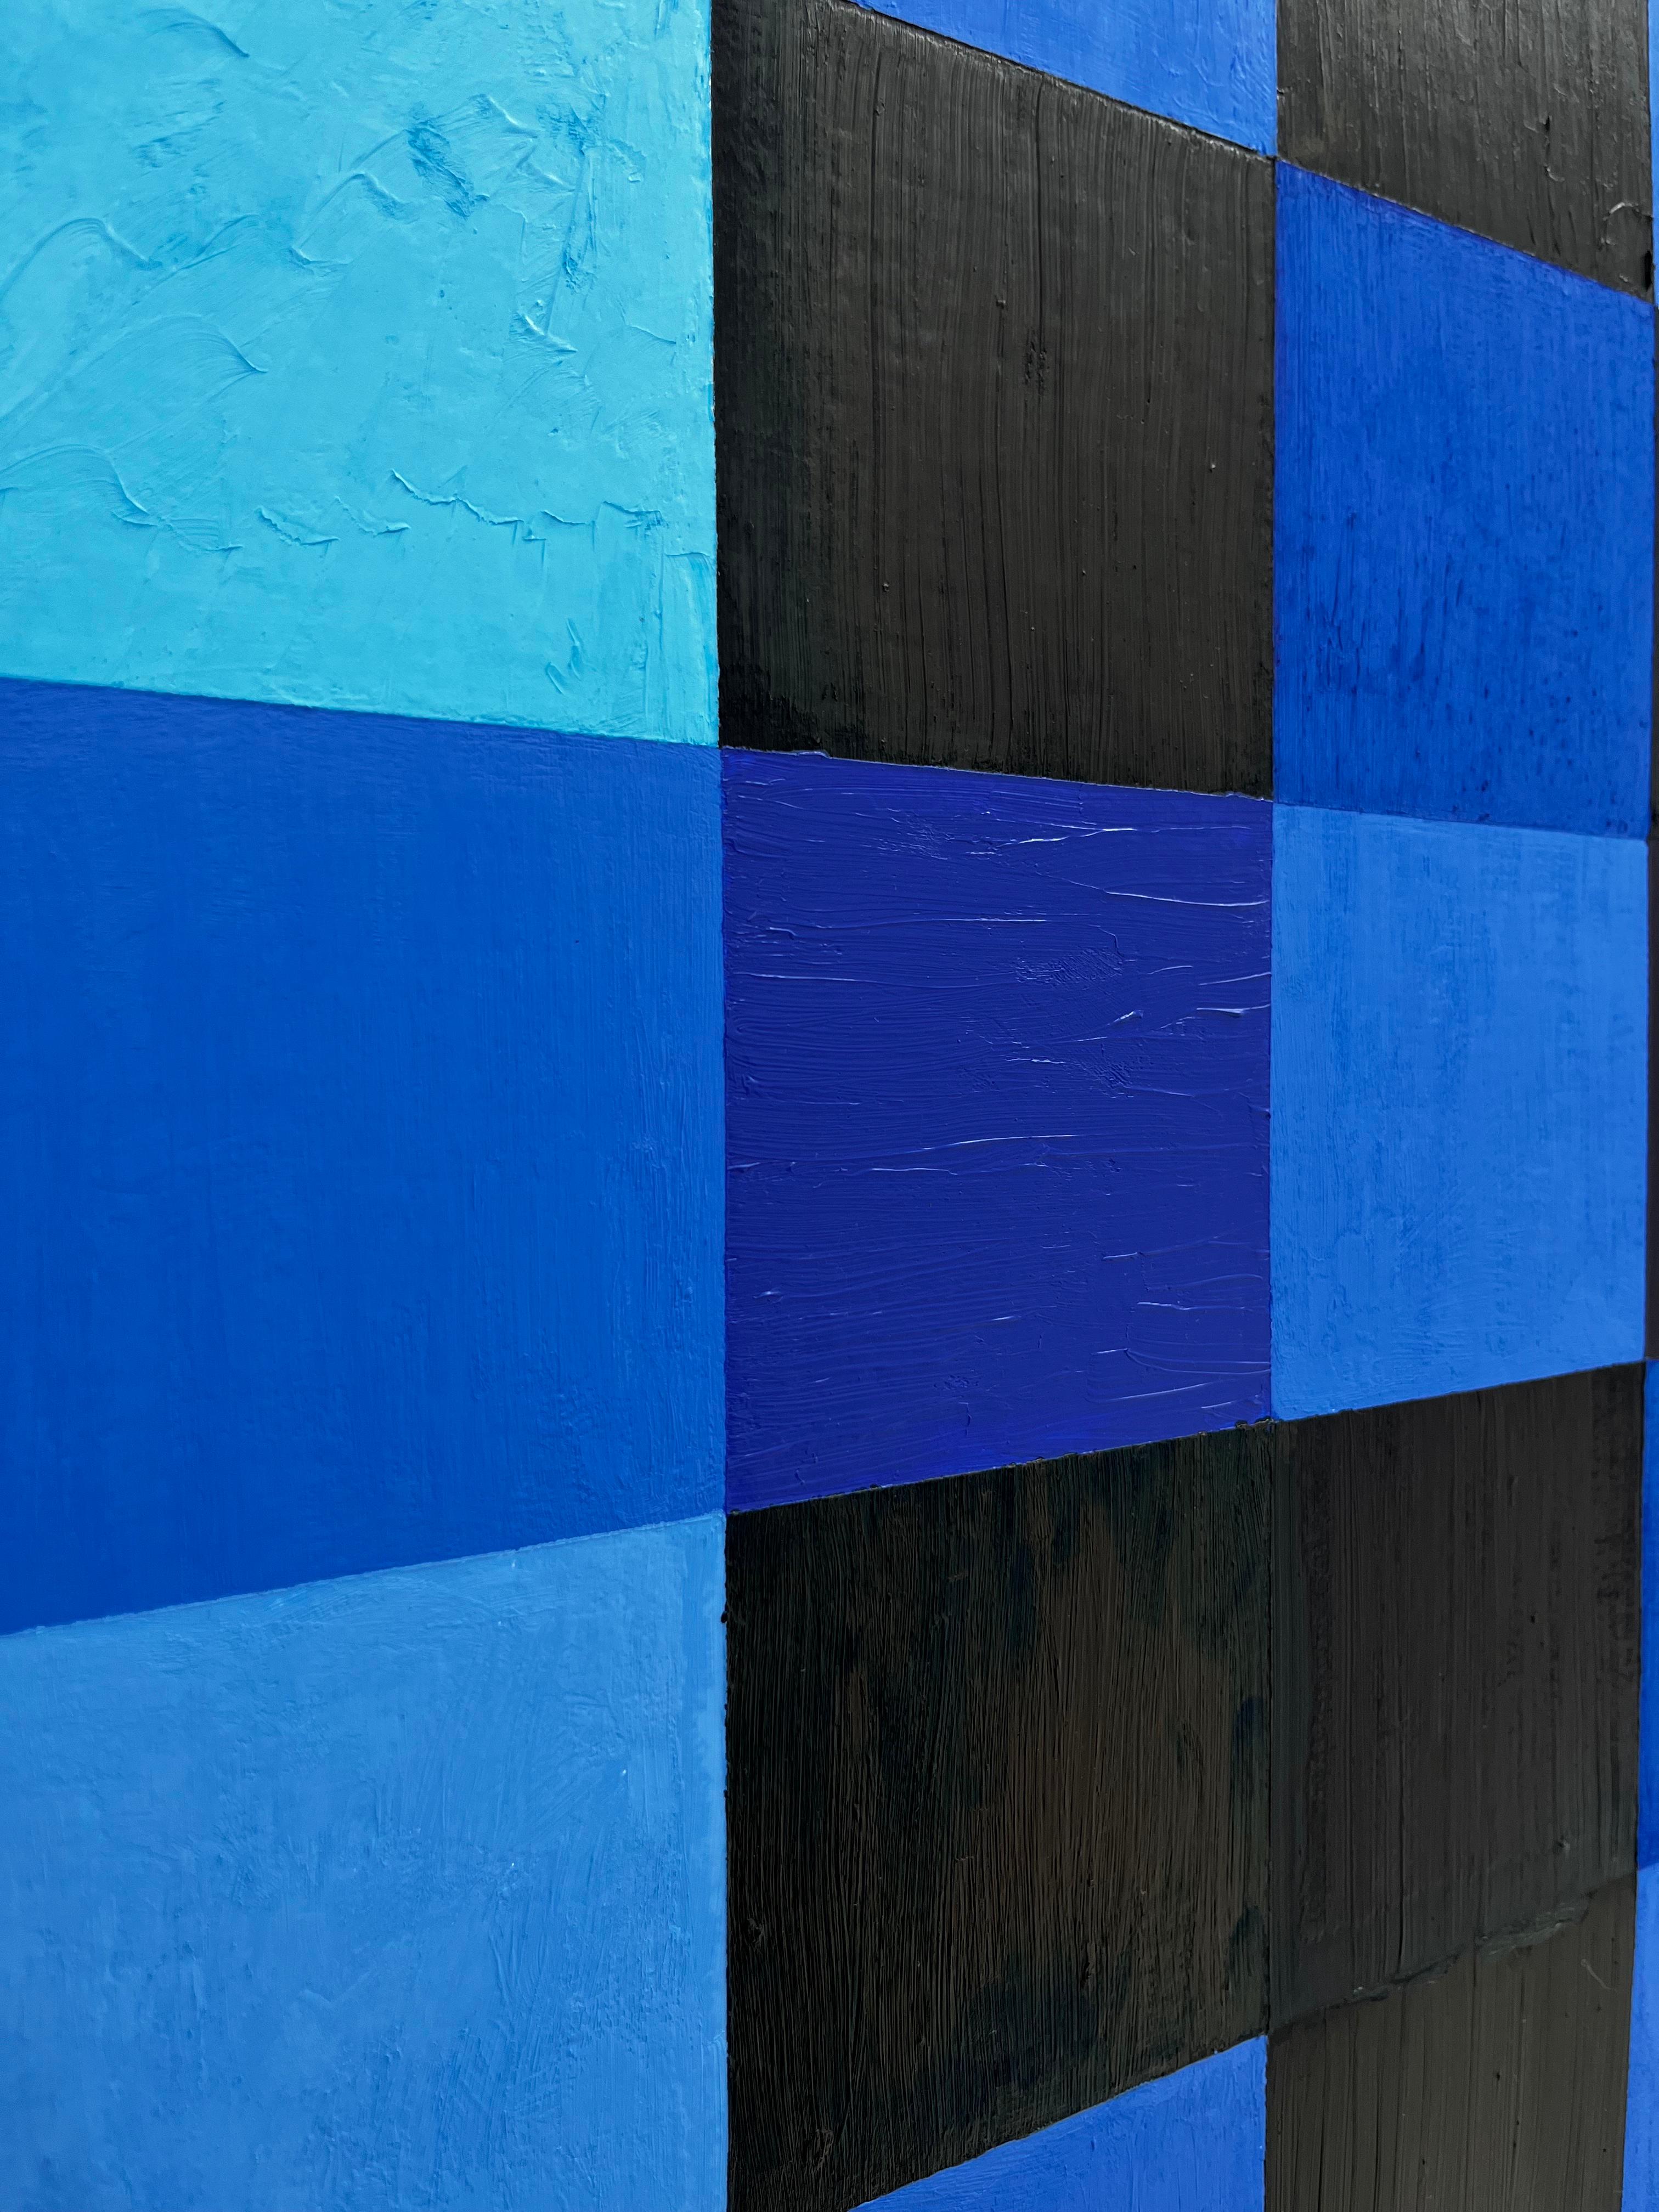 Untitled - abstract oil painting, squares, blue & black - Abstract Painting by Nicolás Guzmán